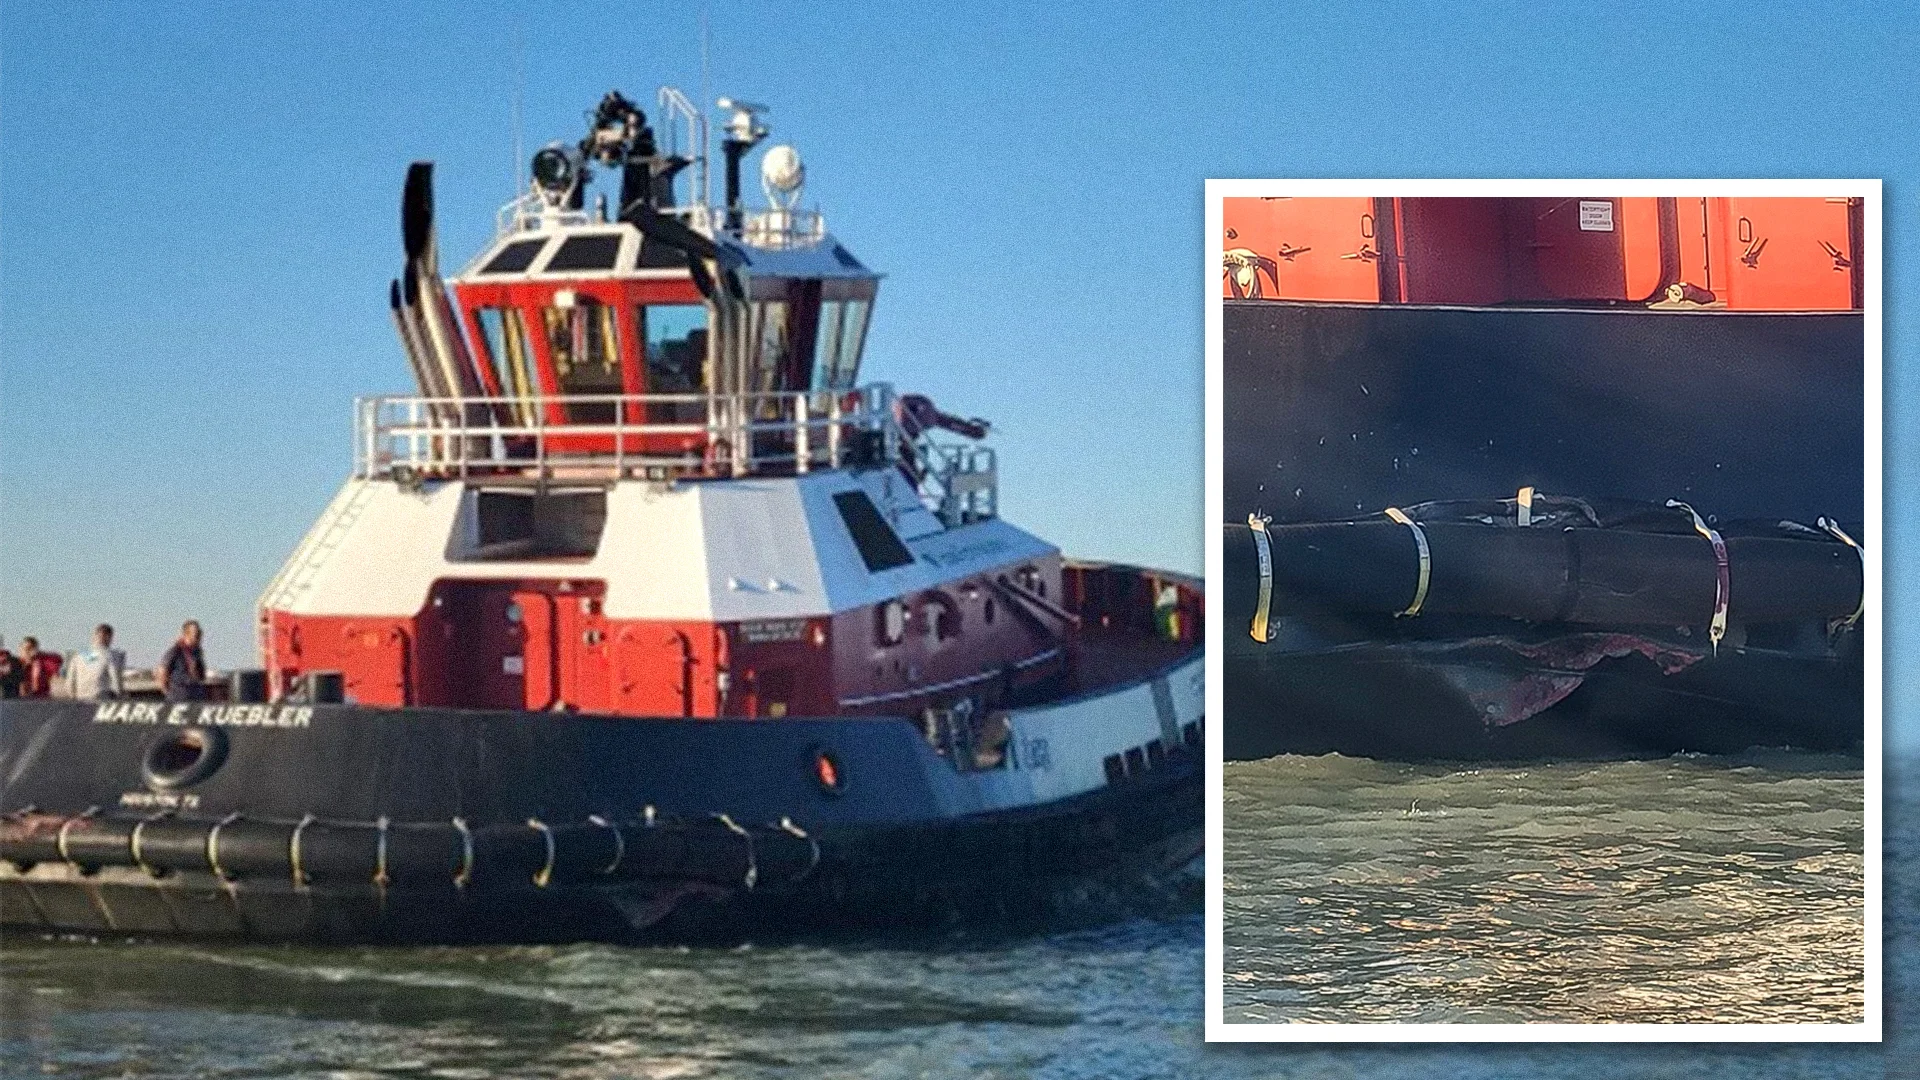 The damaged tug Mark E. Kuebler grounded near Corpus Christi, Texas, on Sunday, Jan. 22, 2023. A large gash is visible just above the waterline. Photos courtesy of Boatswain’s Mate 2nd Class Merrit Carter. Composite by Kenna Lee/Coffee or Die Magazine.